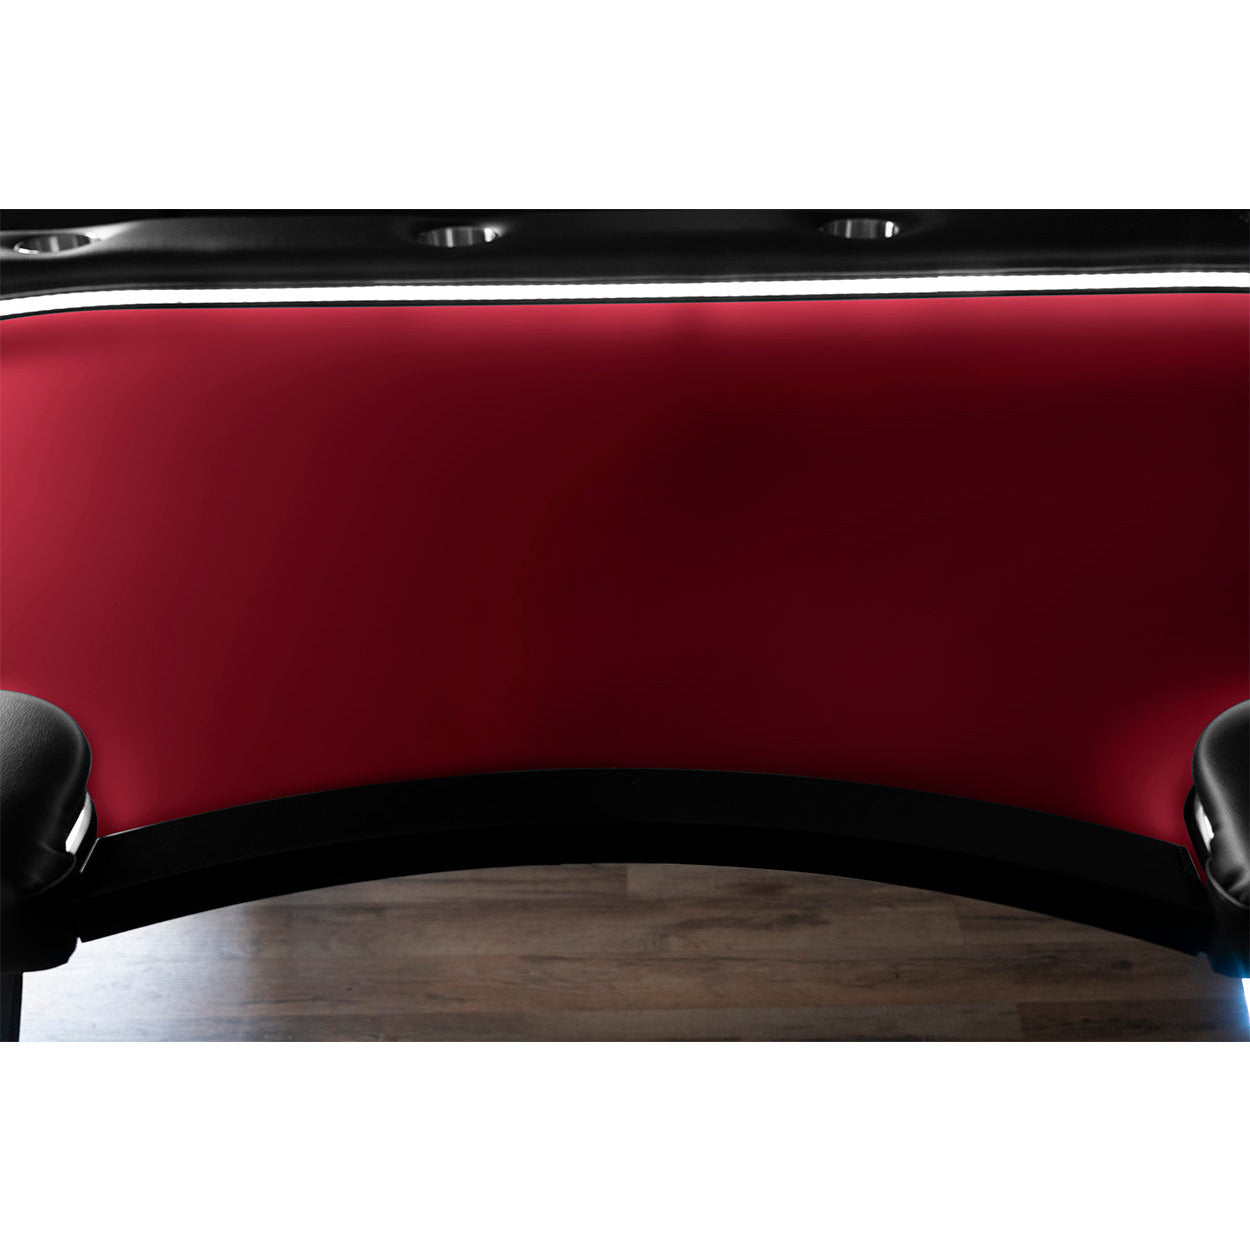 BBO The Aces Pro Alpha Folding Poker Table red close up of back 